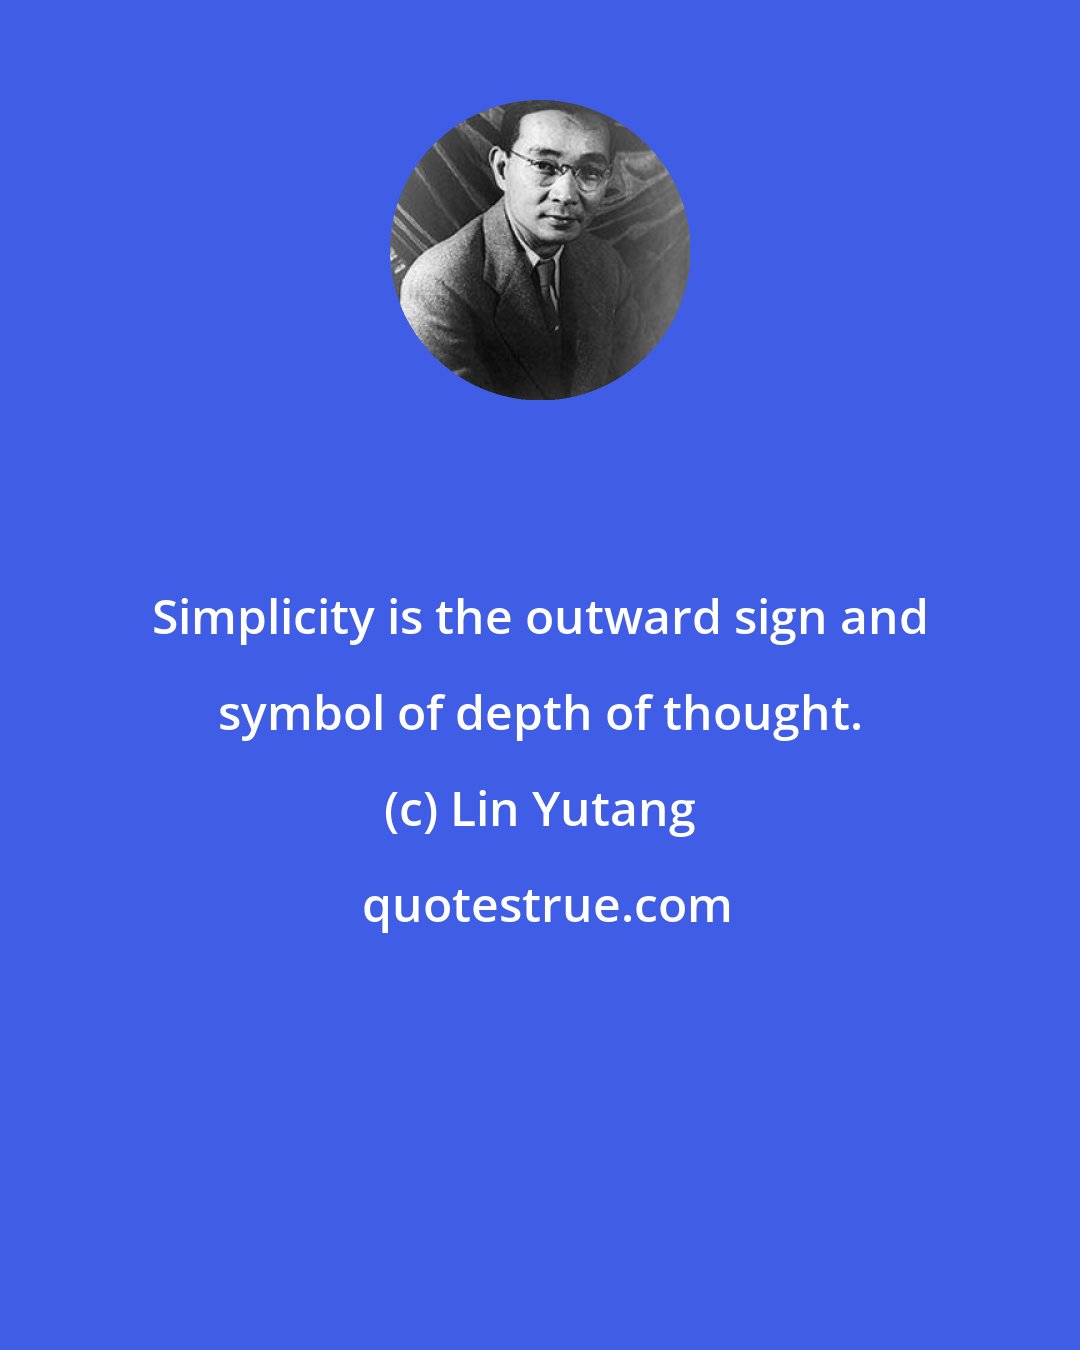 Lin Yutang: Simplicity is the outward sign and symbol of depth of thought.